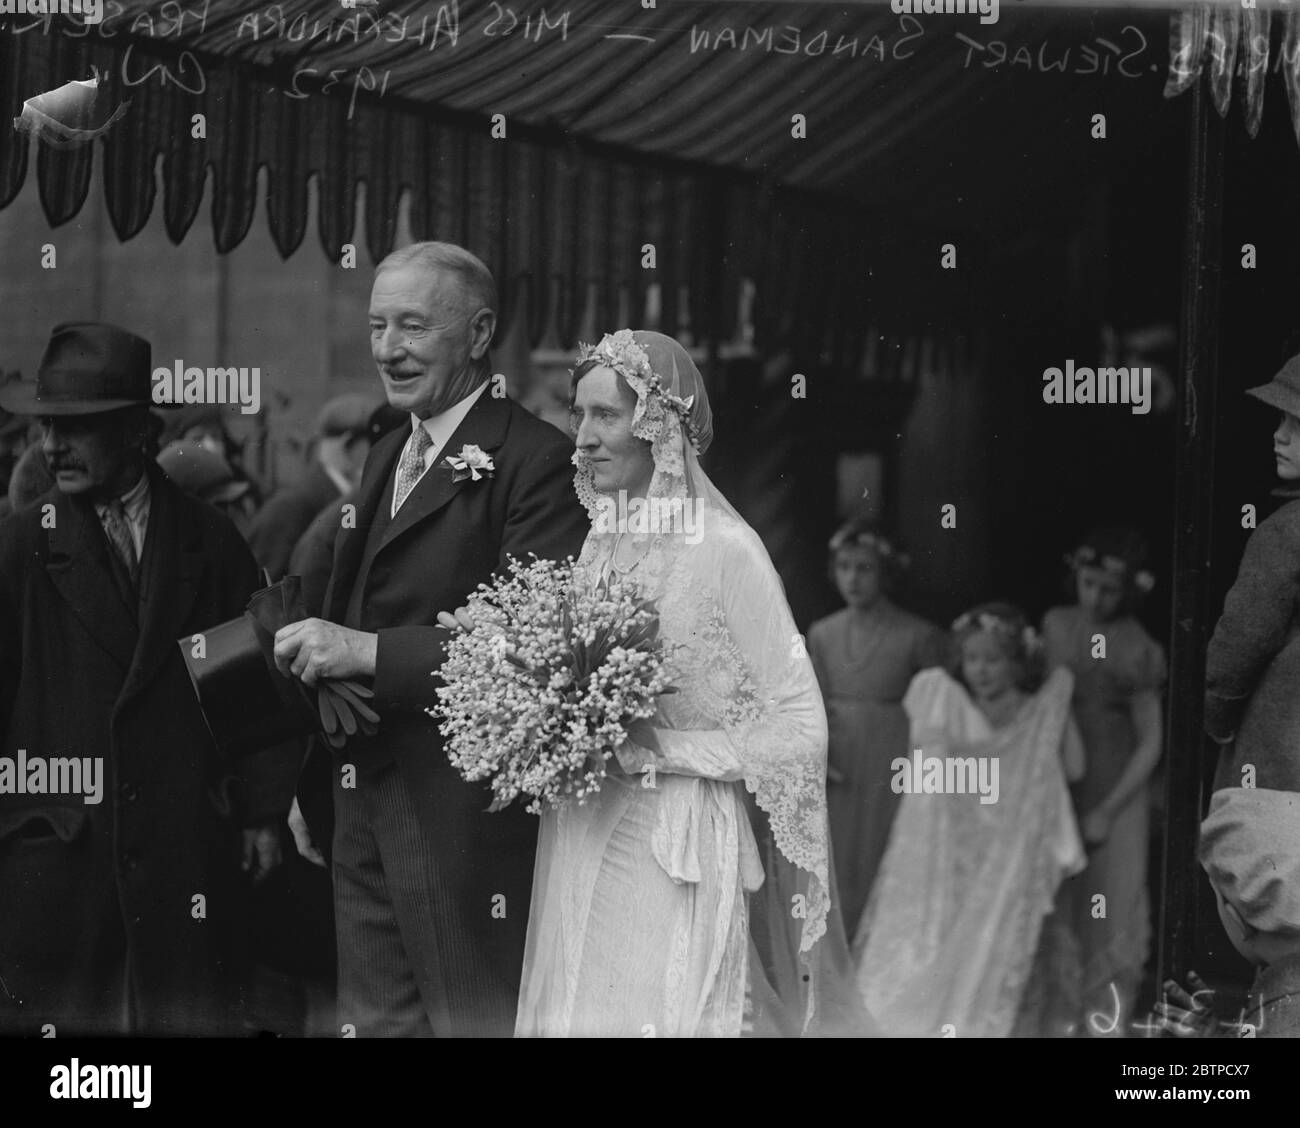 Society wedding . The marriage between Mr F D Stewart Sandeman and Miss Alexandra Fraser , took place on Wednesday , at All Saints Ennismore Gardens . Bride and bridegroom . 23 November 1932 Stock Photo